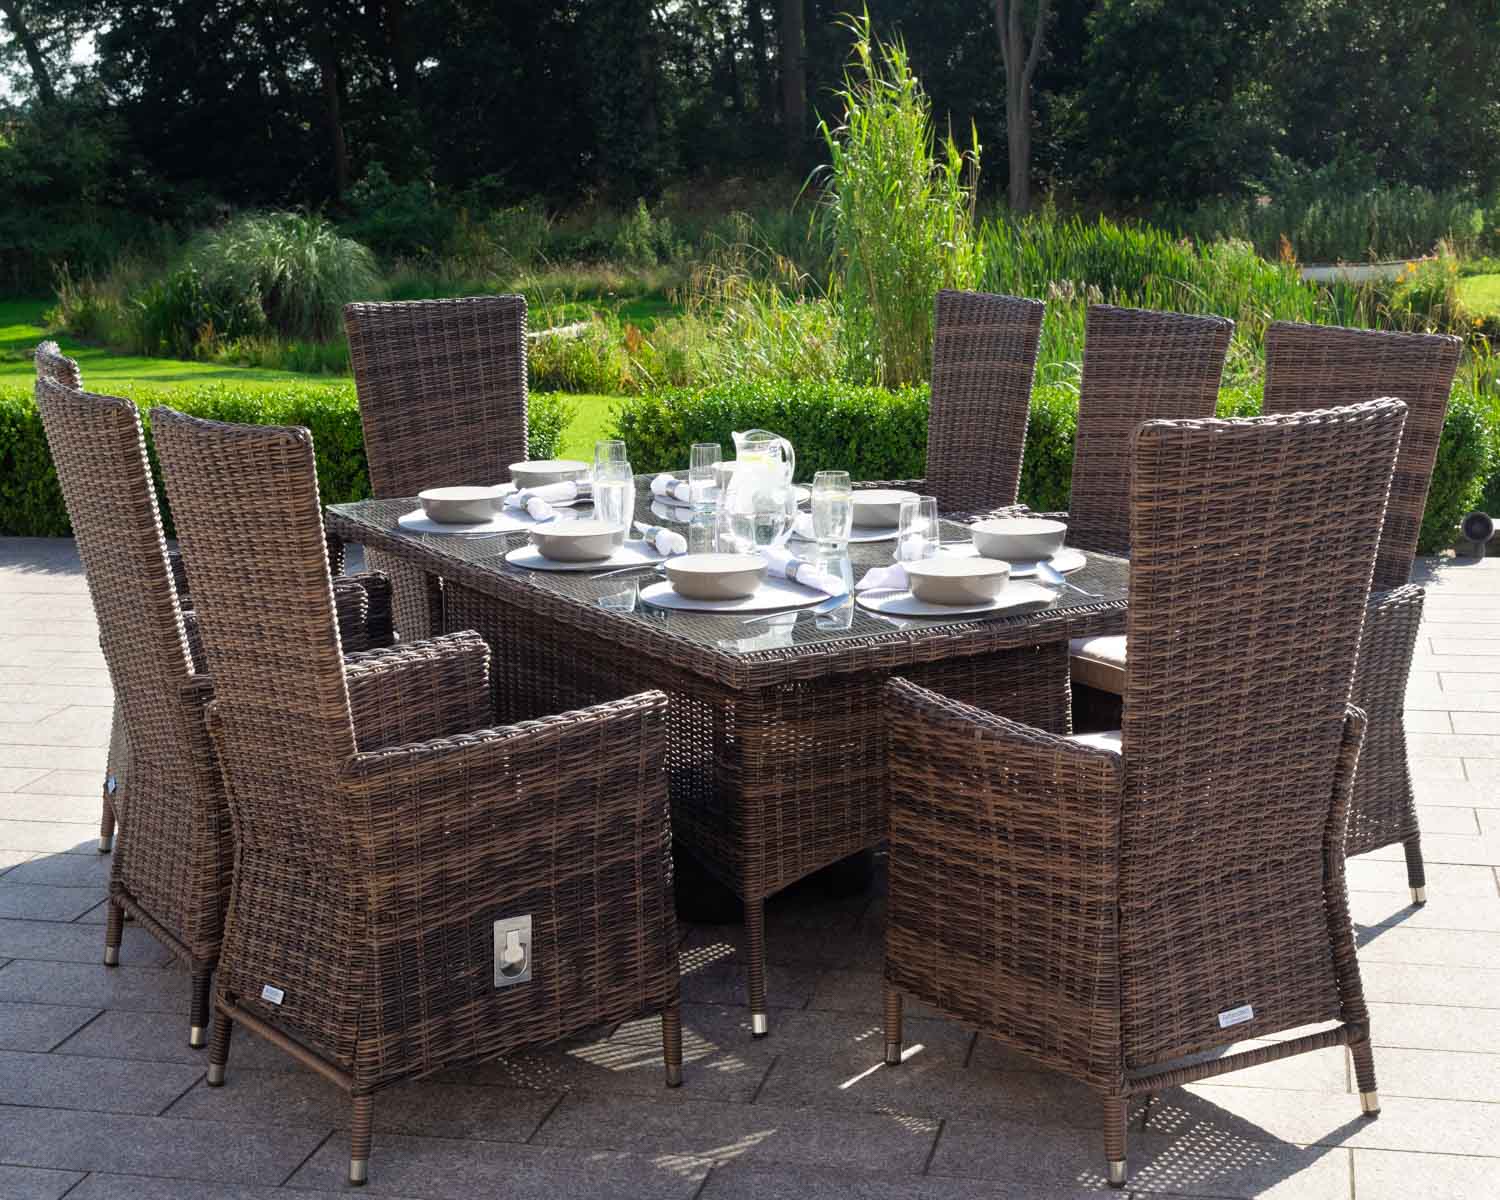 8 Seat Rattan Garden Dining Set With Rectangular Dining Table in